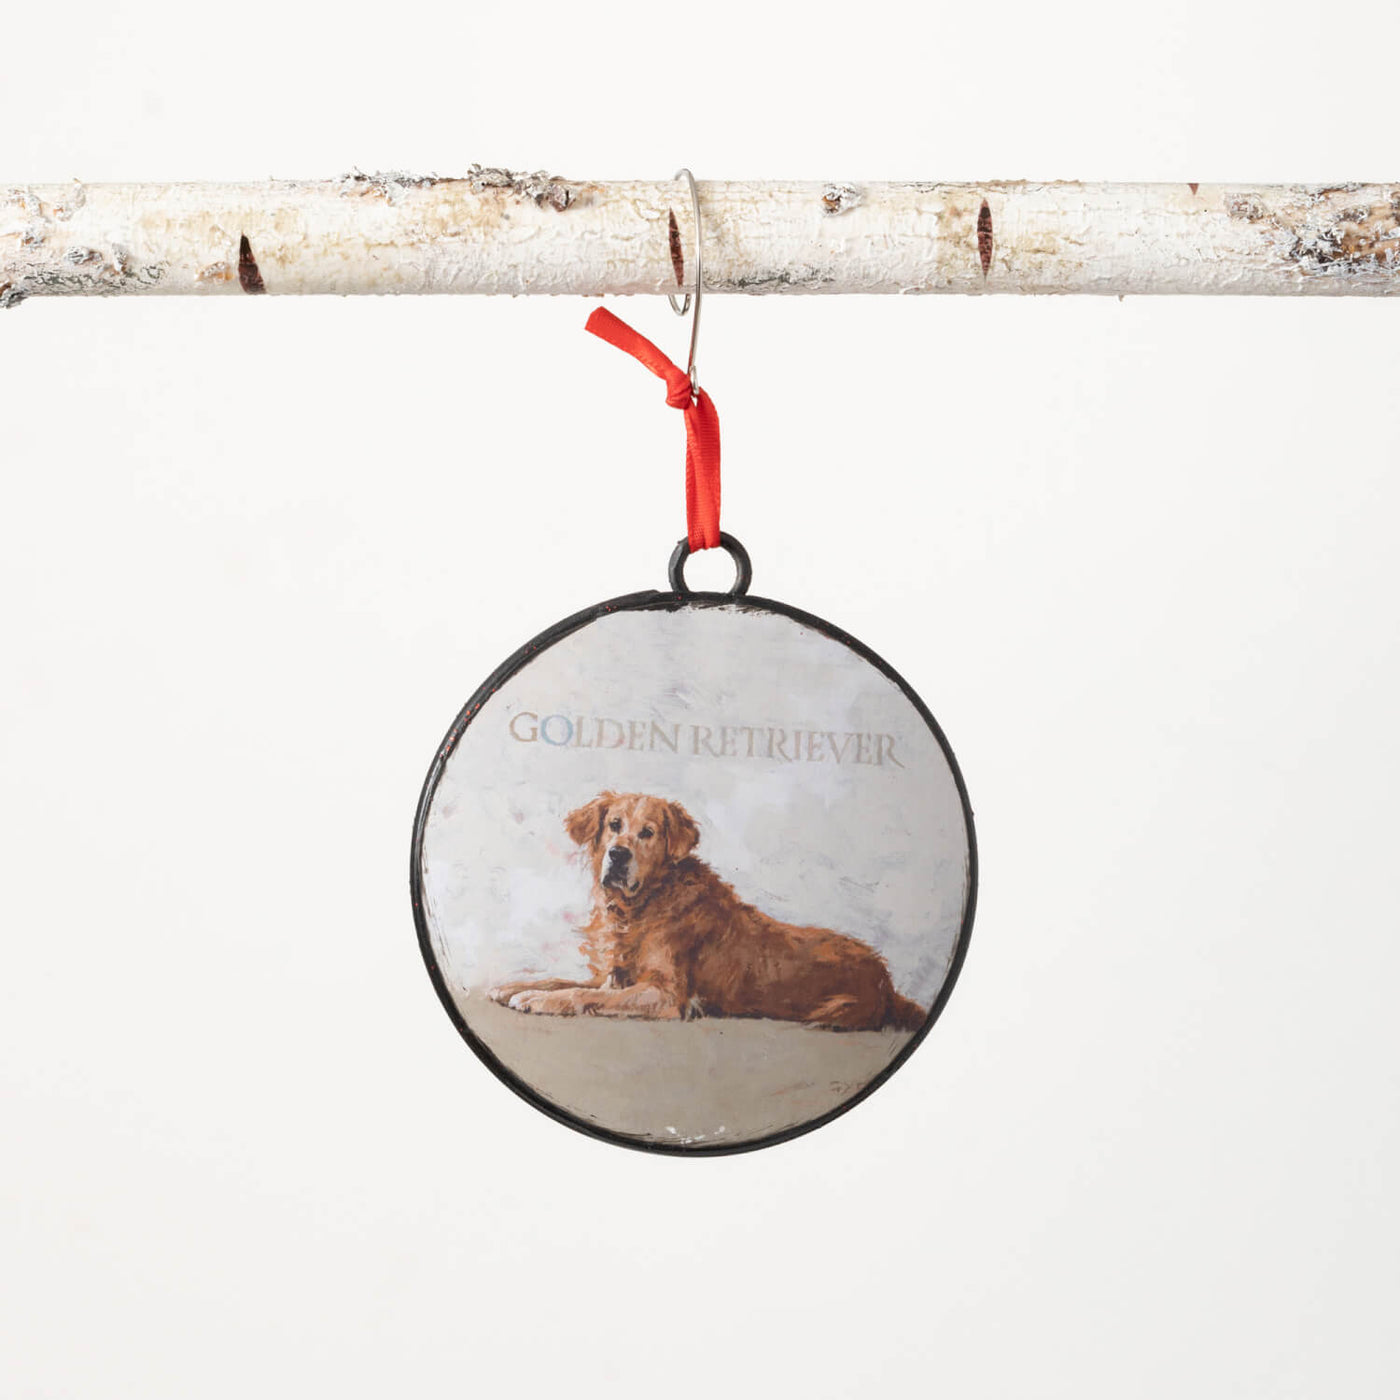 Round metal ornament with portrait of a Golden Retriever on the front and a red back. Comes with a red ribbon for hanging.